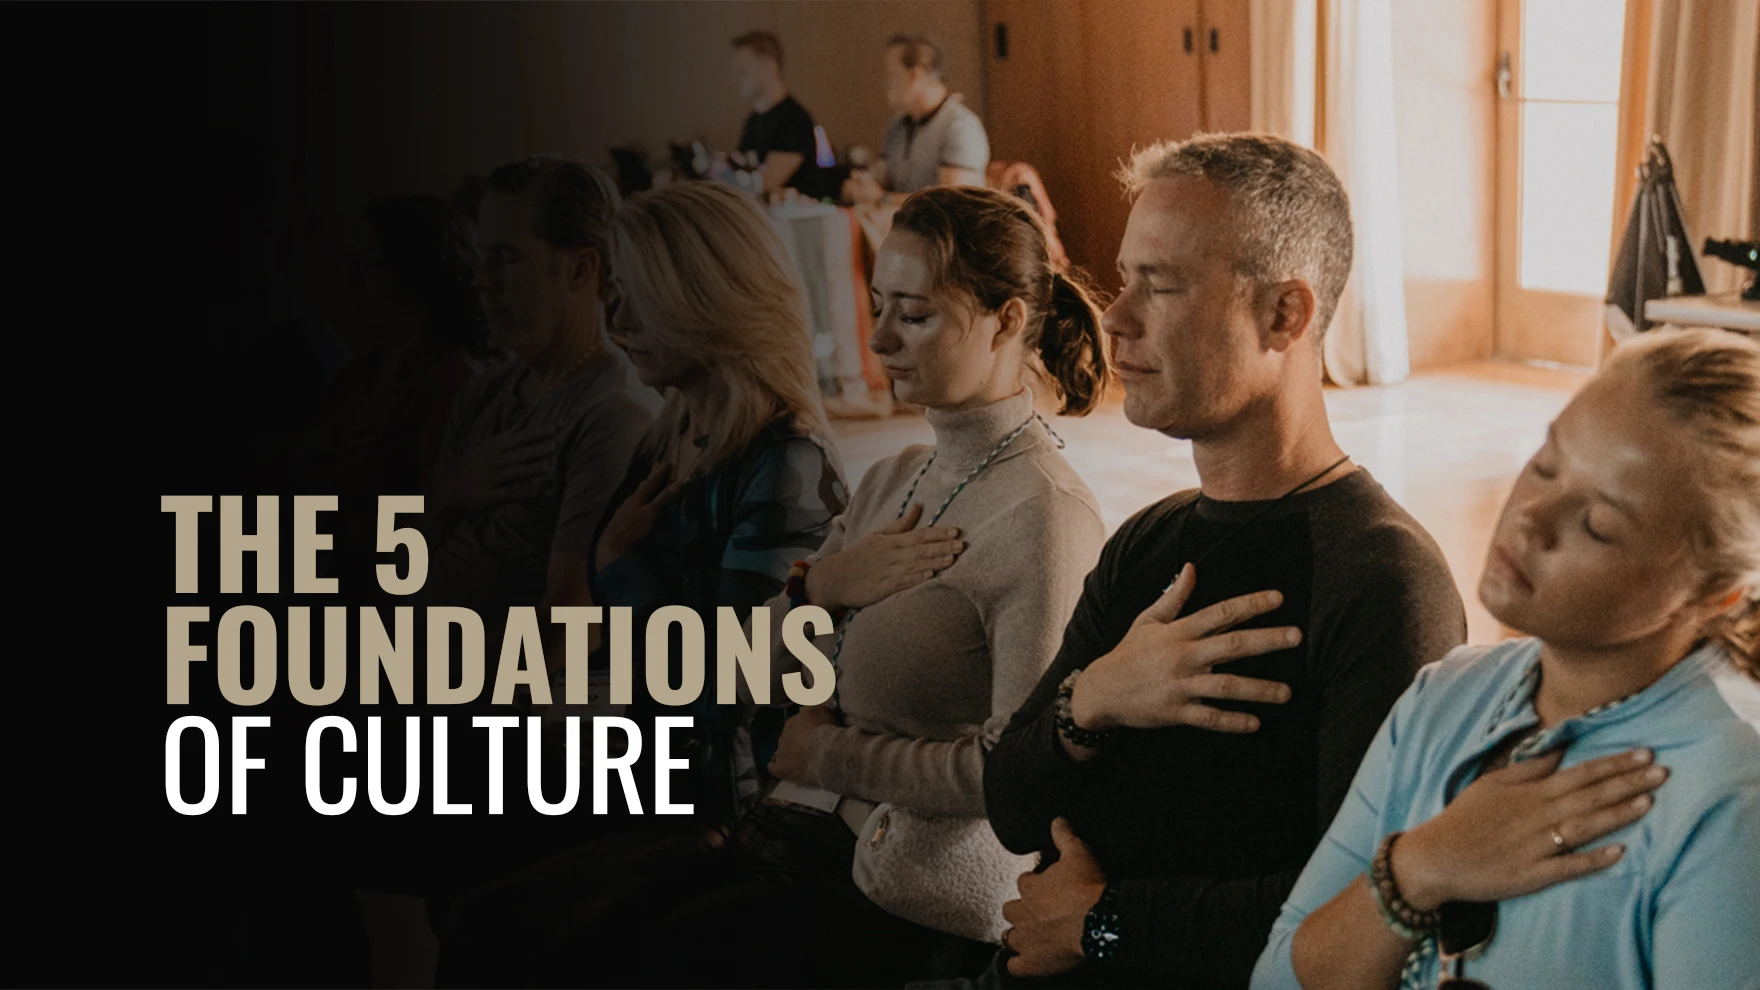 The 5 Foundations of Culture